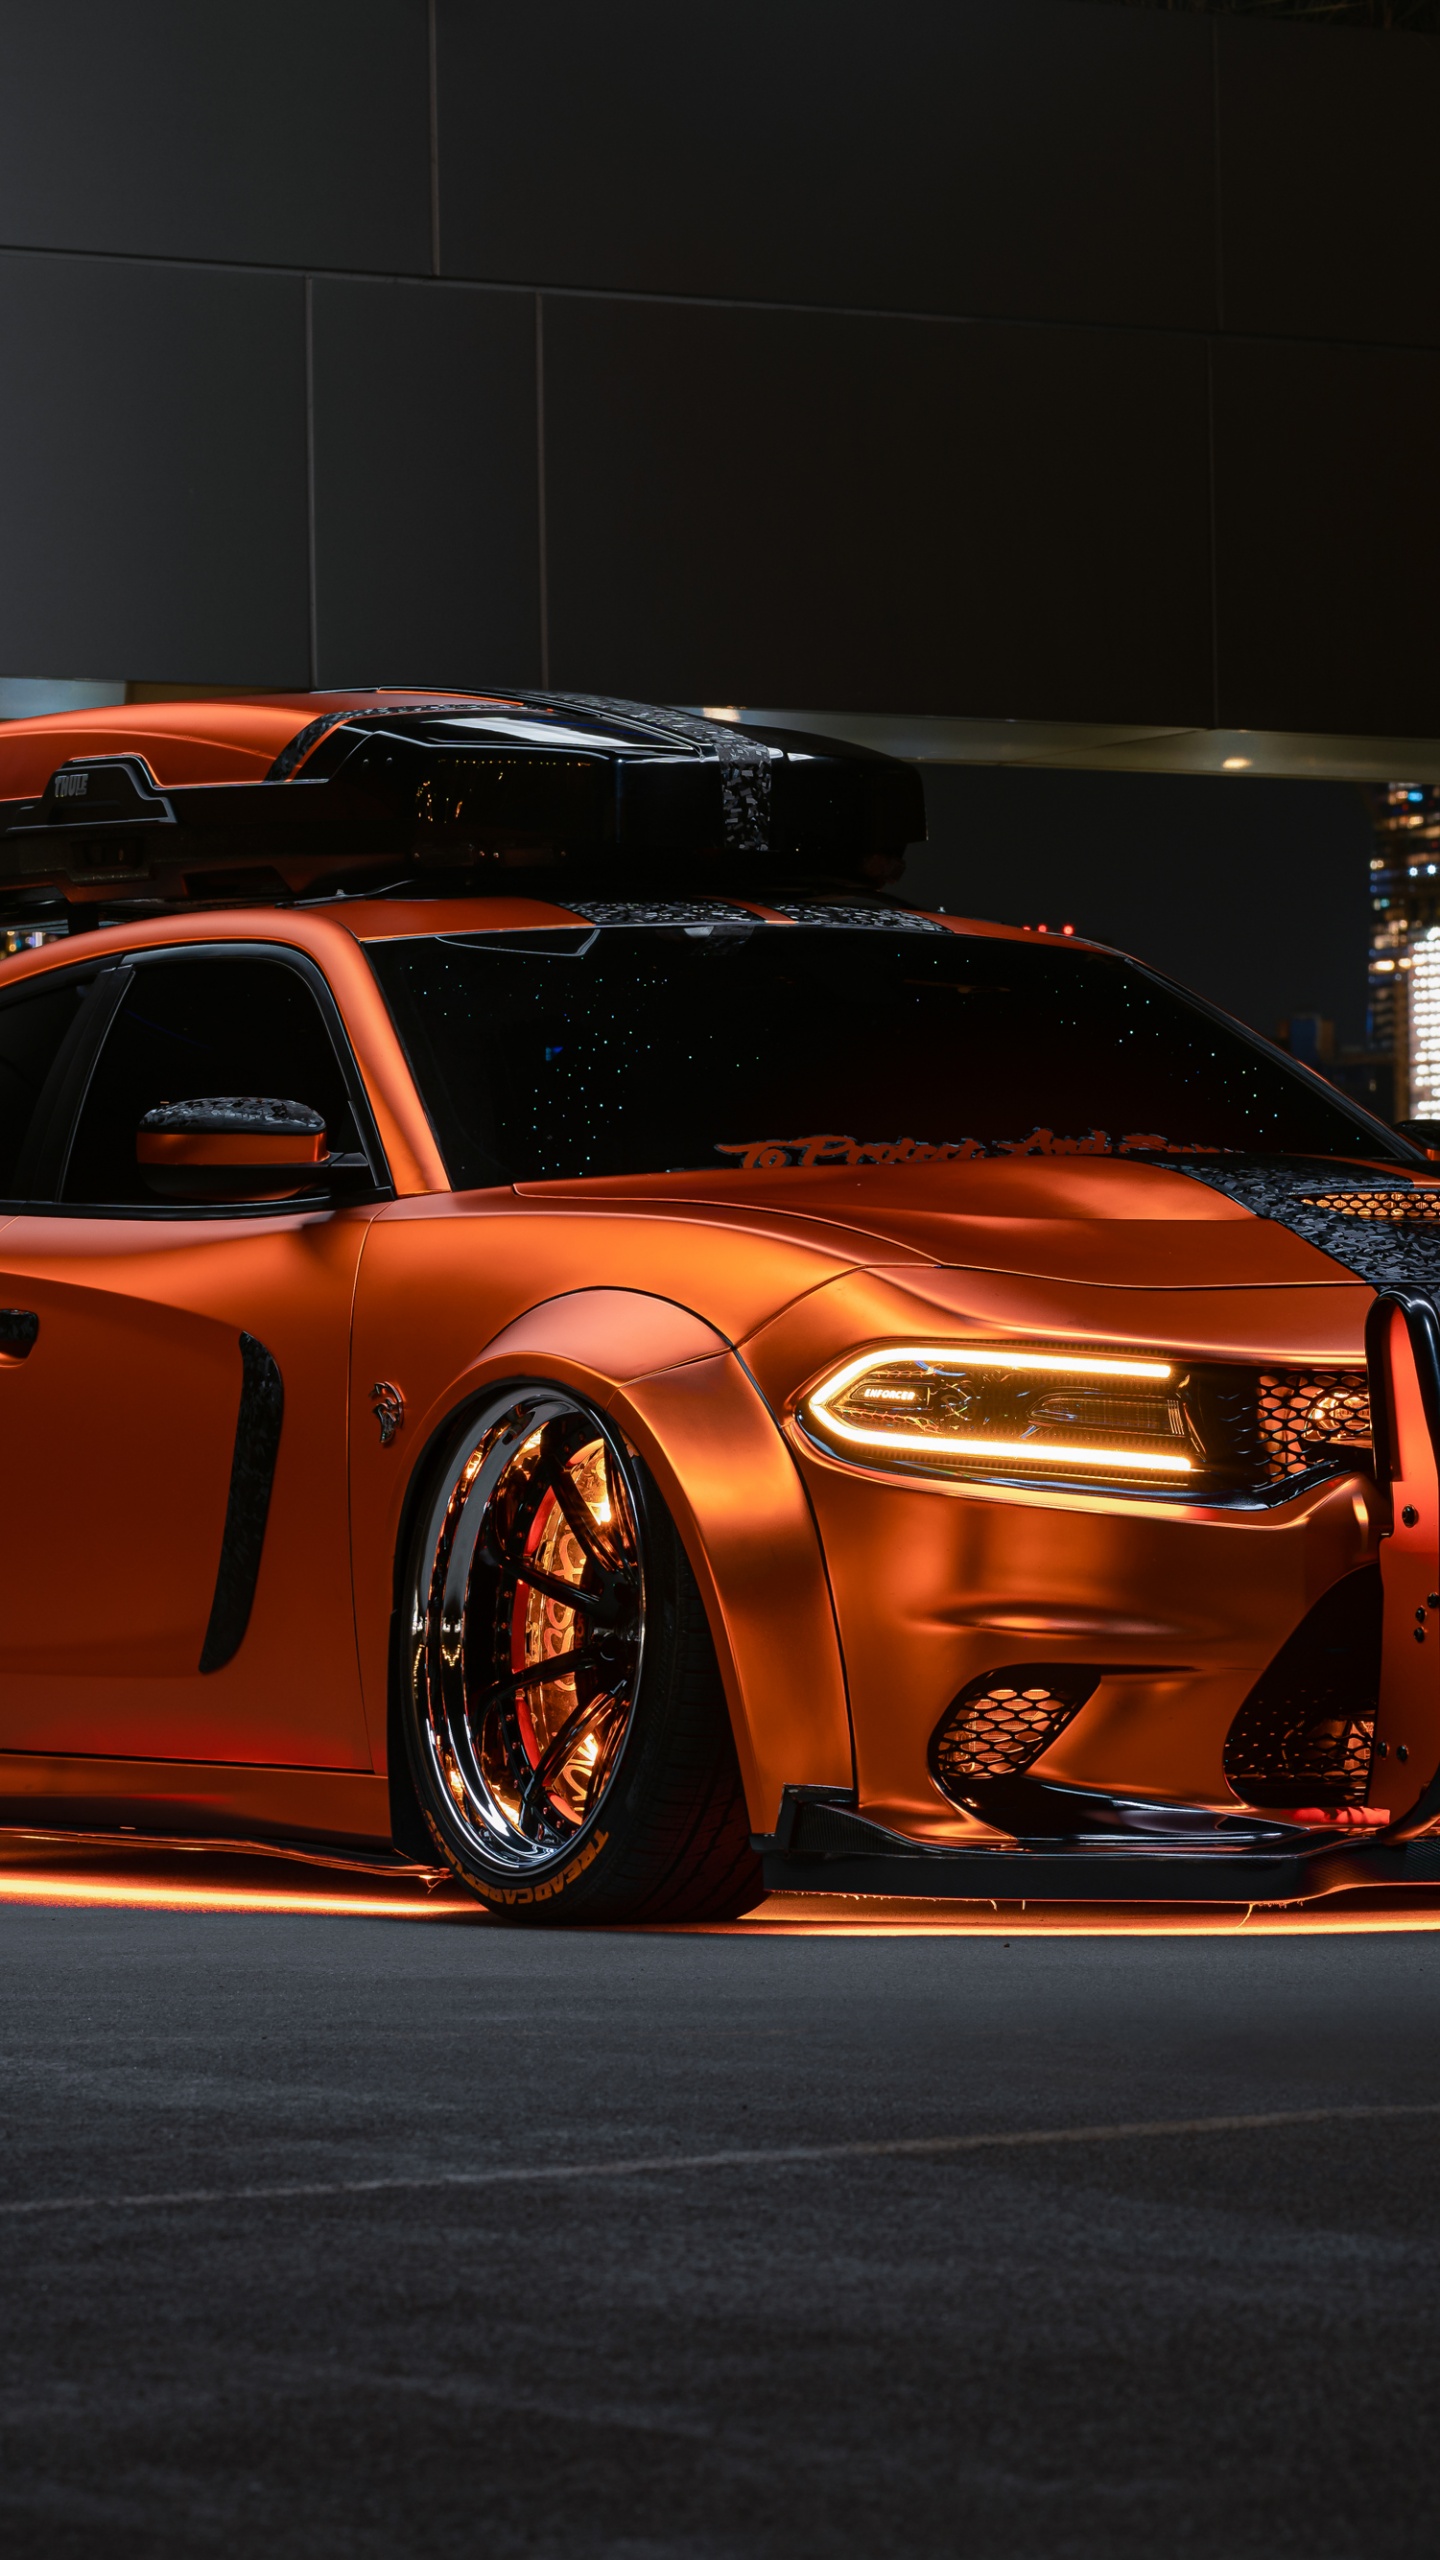 To hellcat fans heres a couple of wallpapers for your phone    rTheCrew